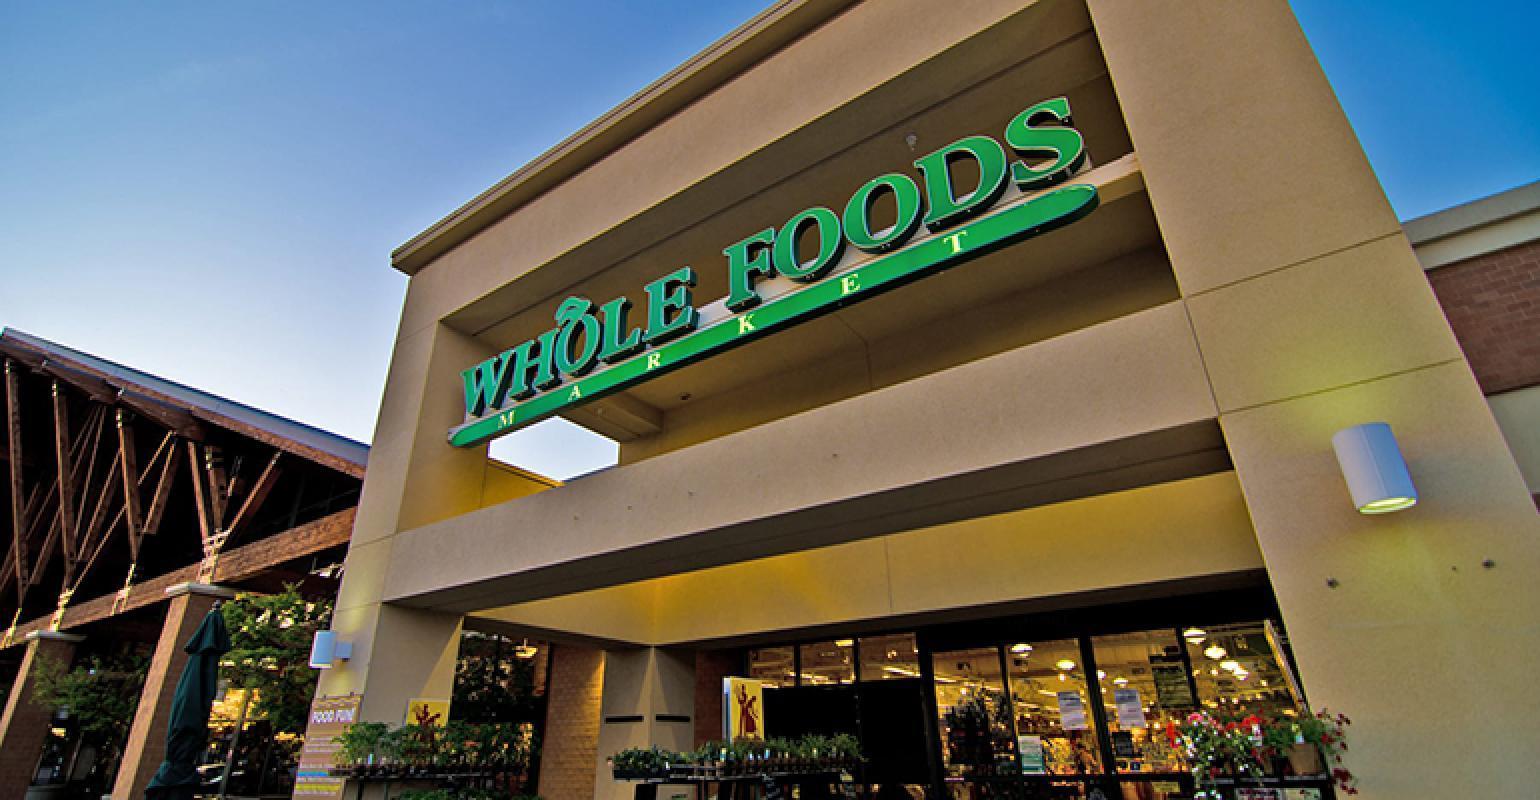 Whole Foods launches national grocery delivery, pickup service